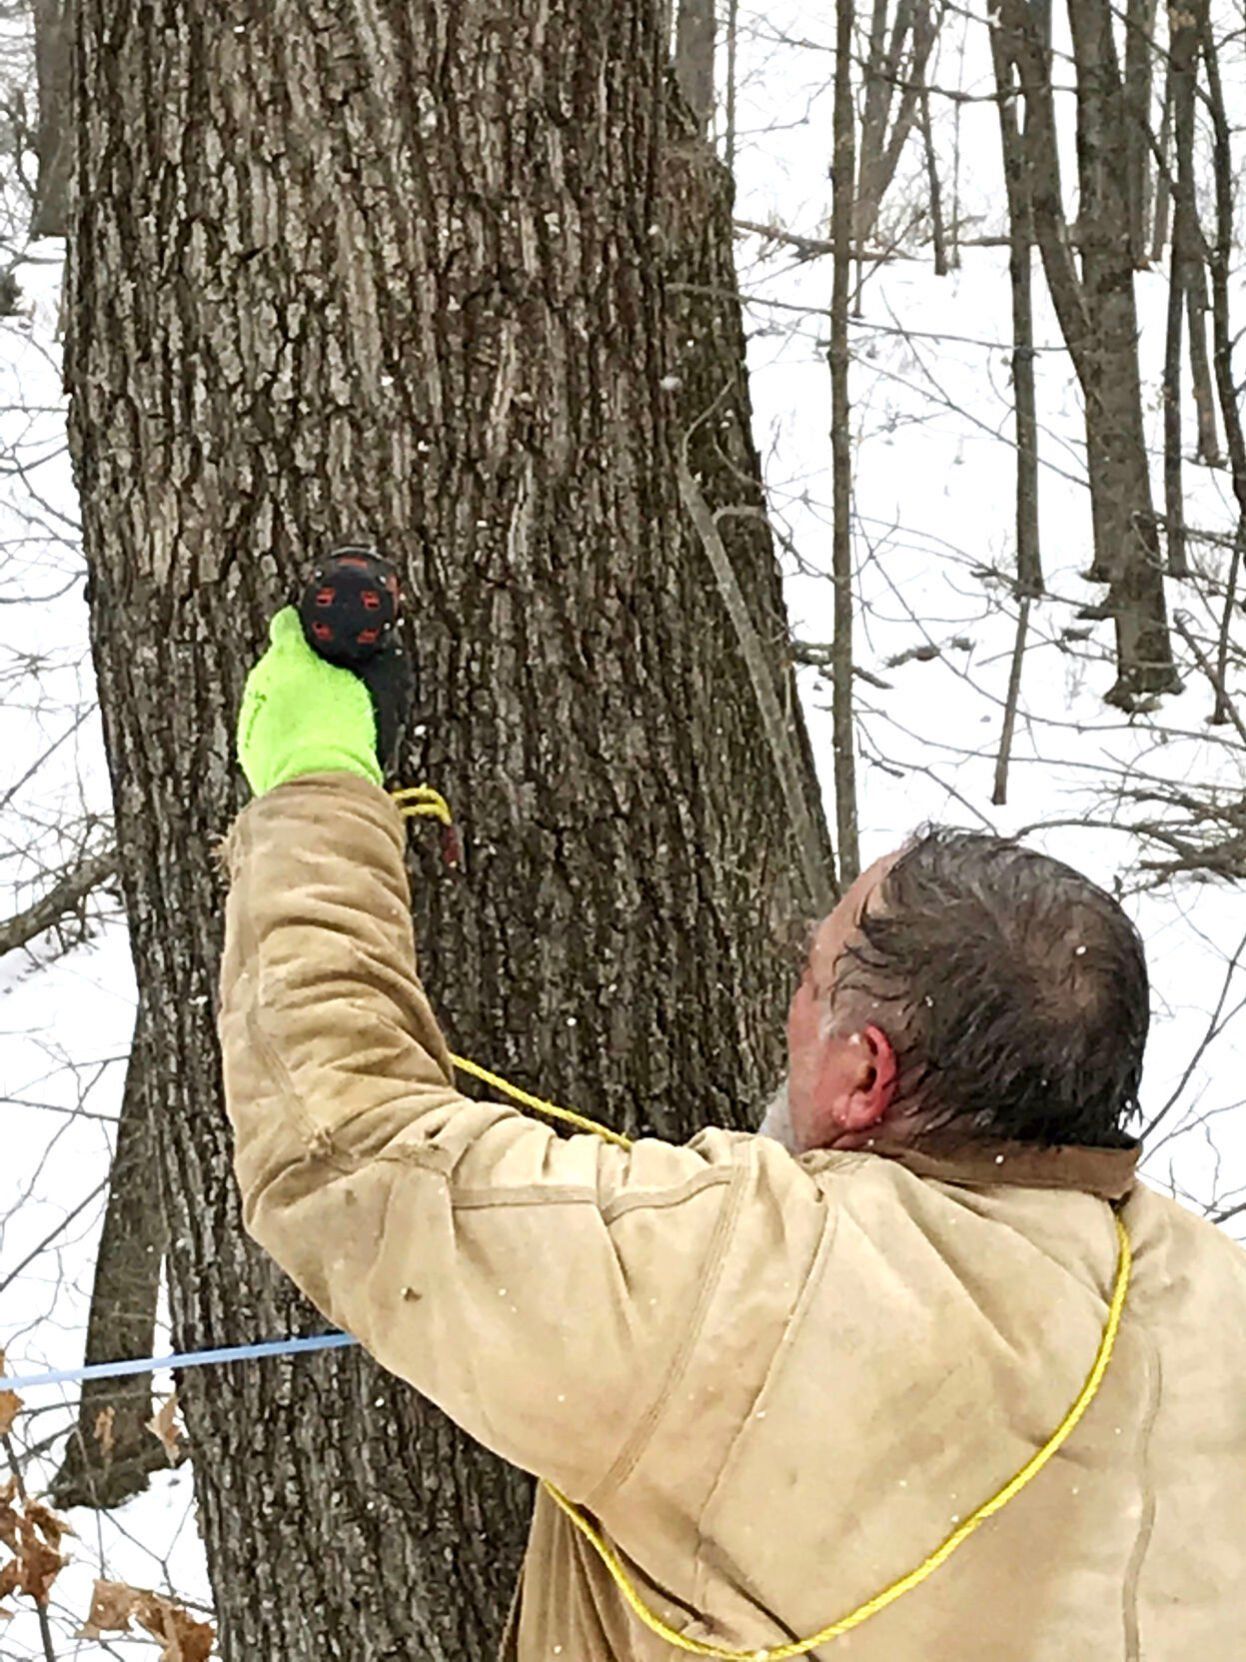 Tony Zenner drills a hole for taps at Timber Range Farm in Durango, Iowa.    PHOTO CREDIT: Contributed